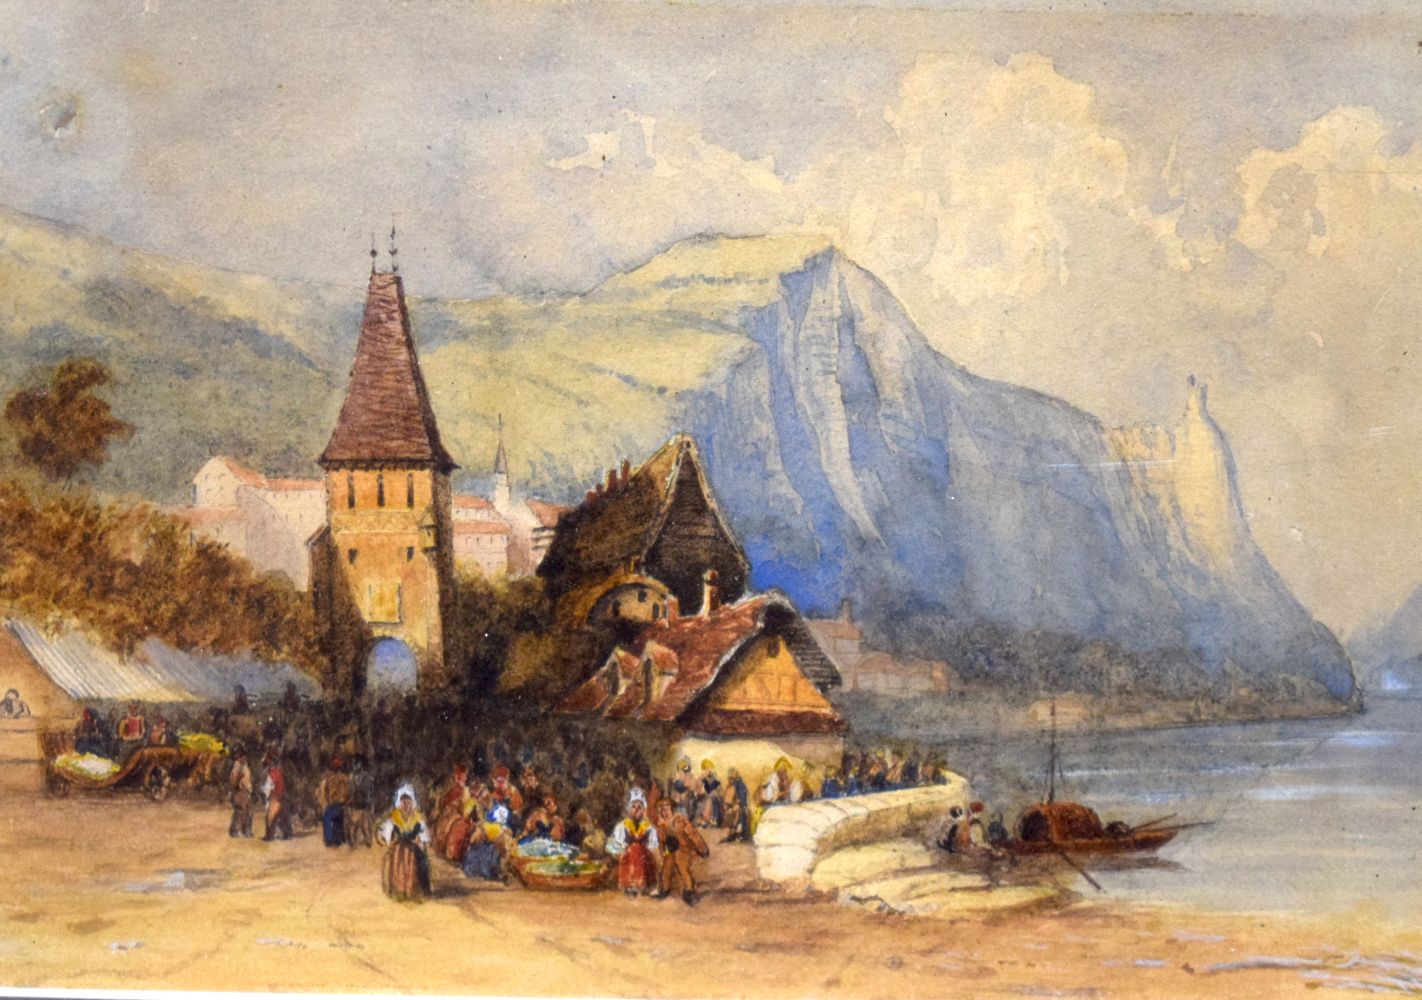 Continental School (19th Century) Watercolour, Peasants by the coast. Image 17 cm x 24 cm. - Image 2 of 3